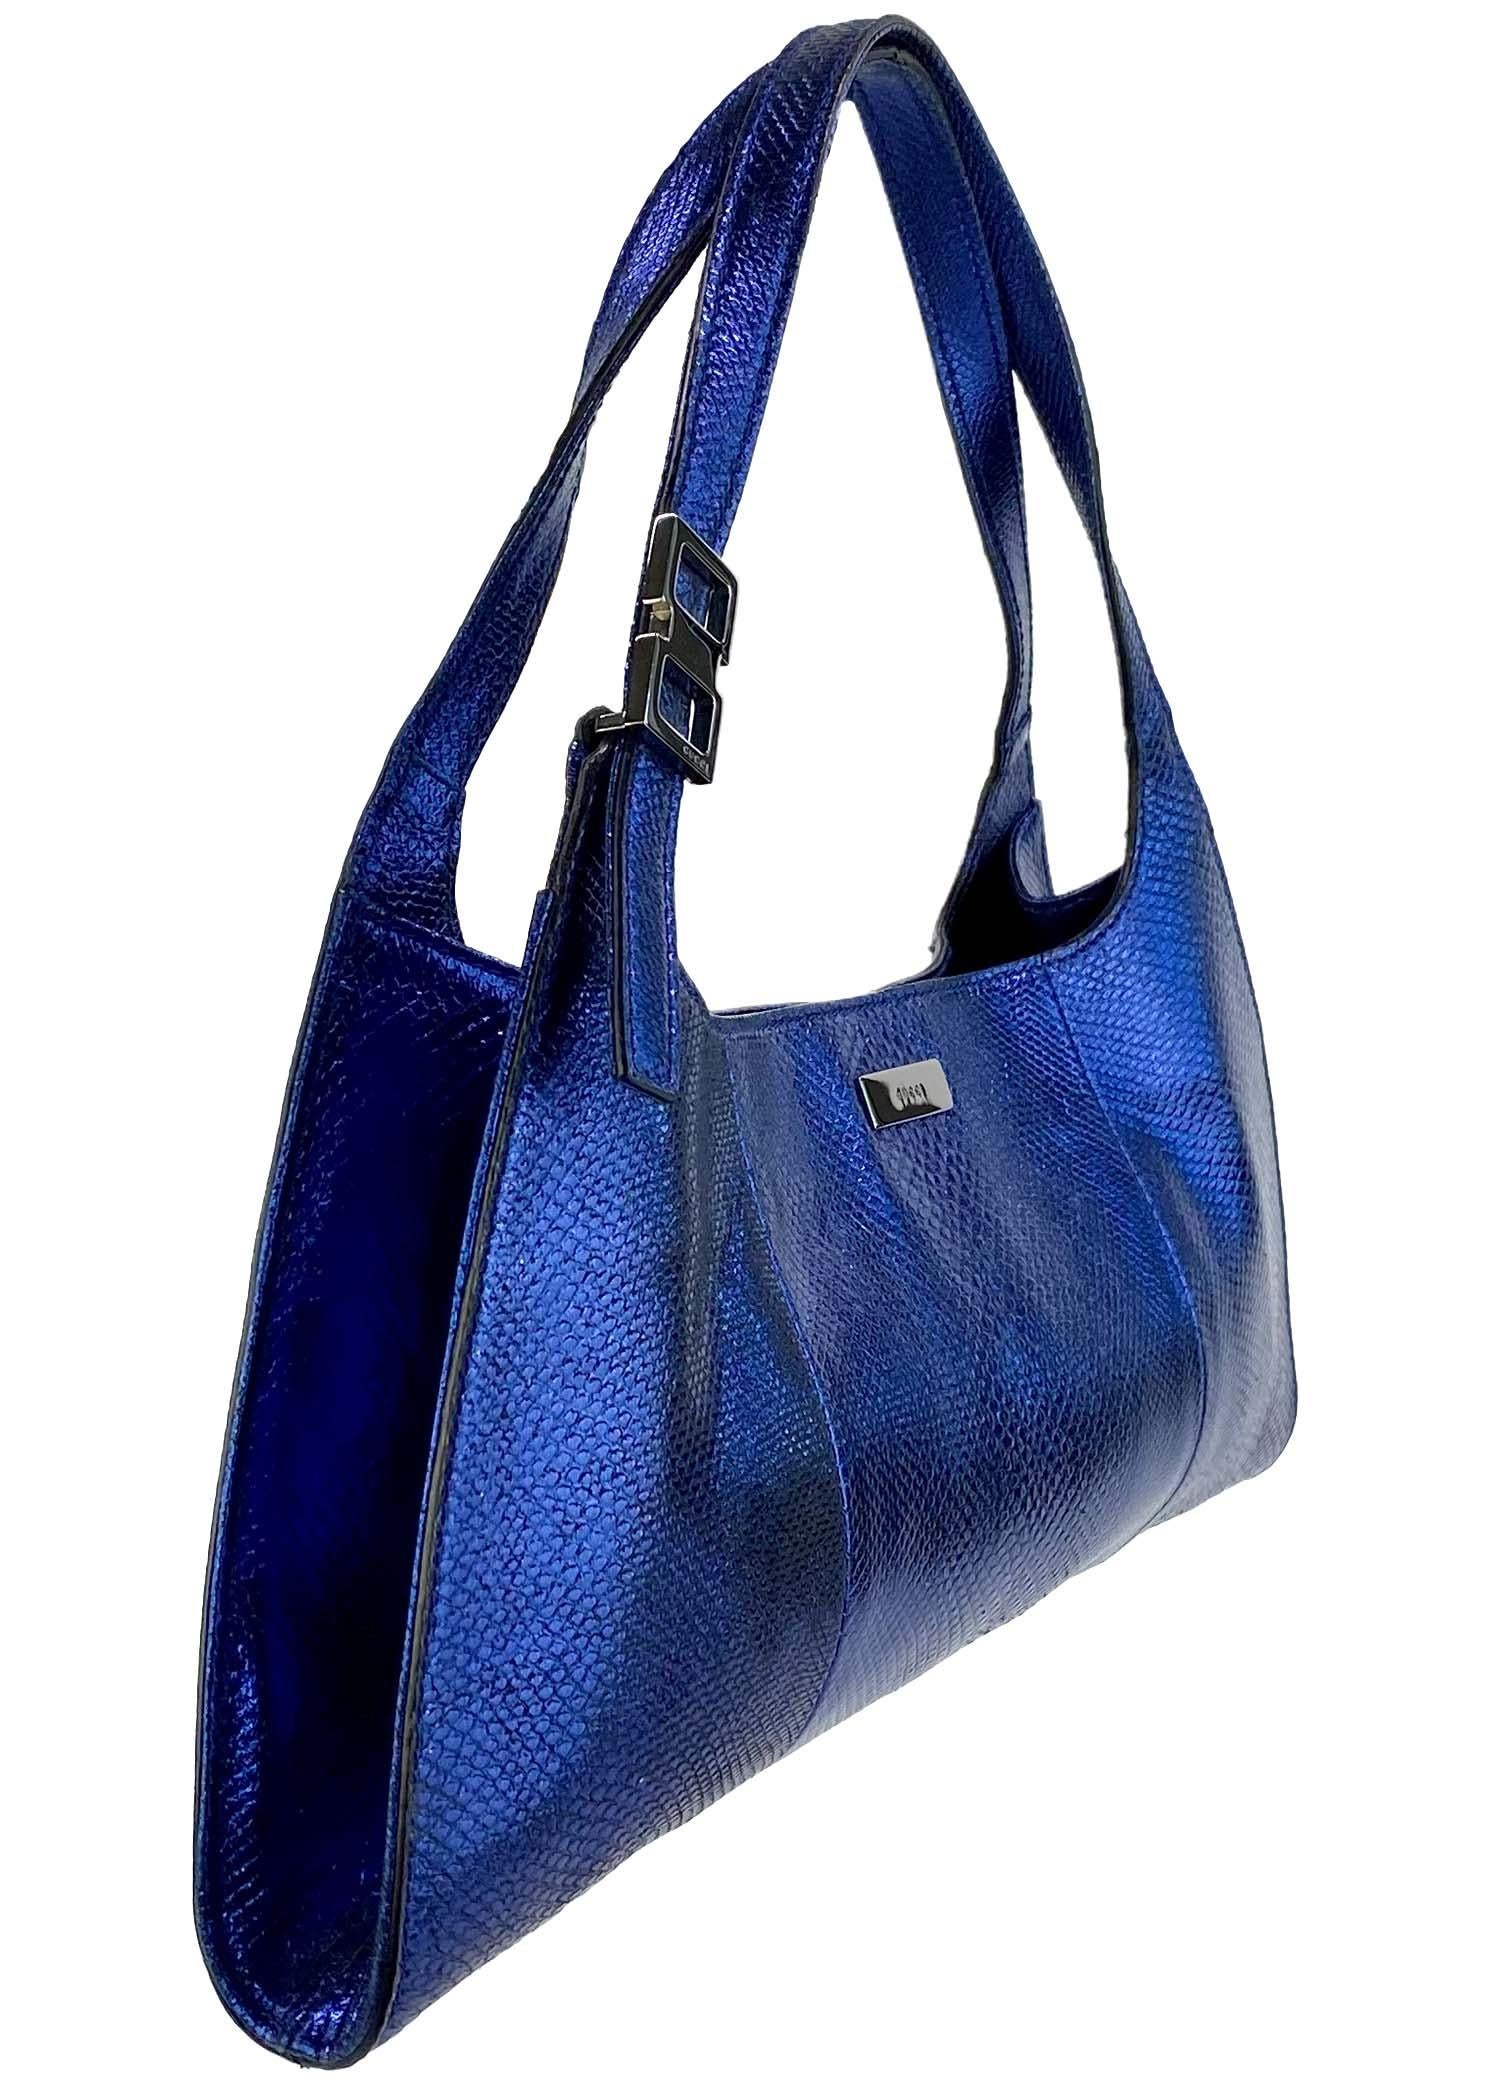 S/S 2001 Gucci by Tom Ford Metallic Blue Lizard Bag In Excellent Condition In West Hollywood, CA